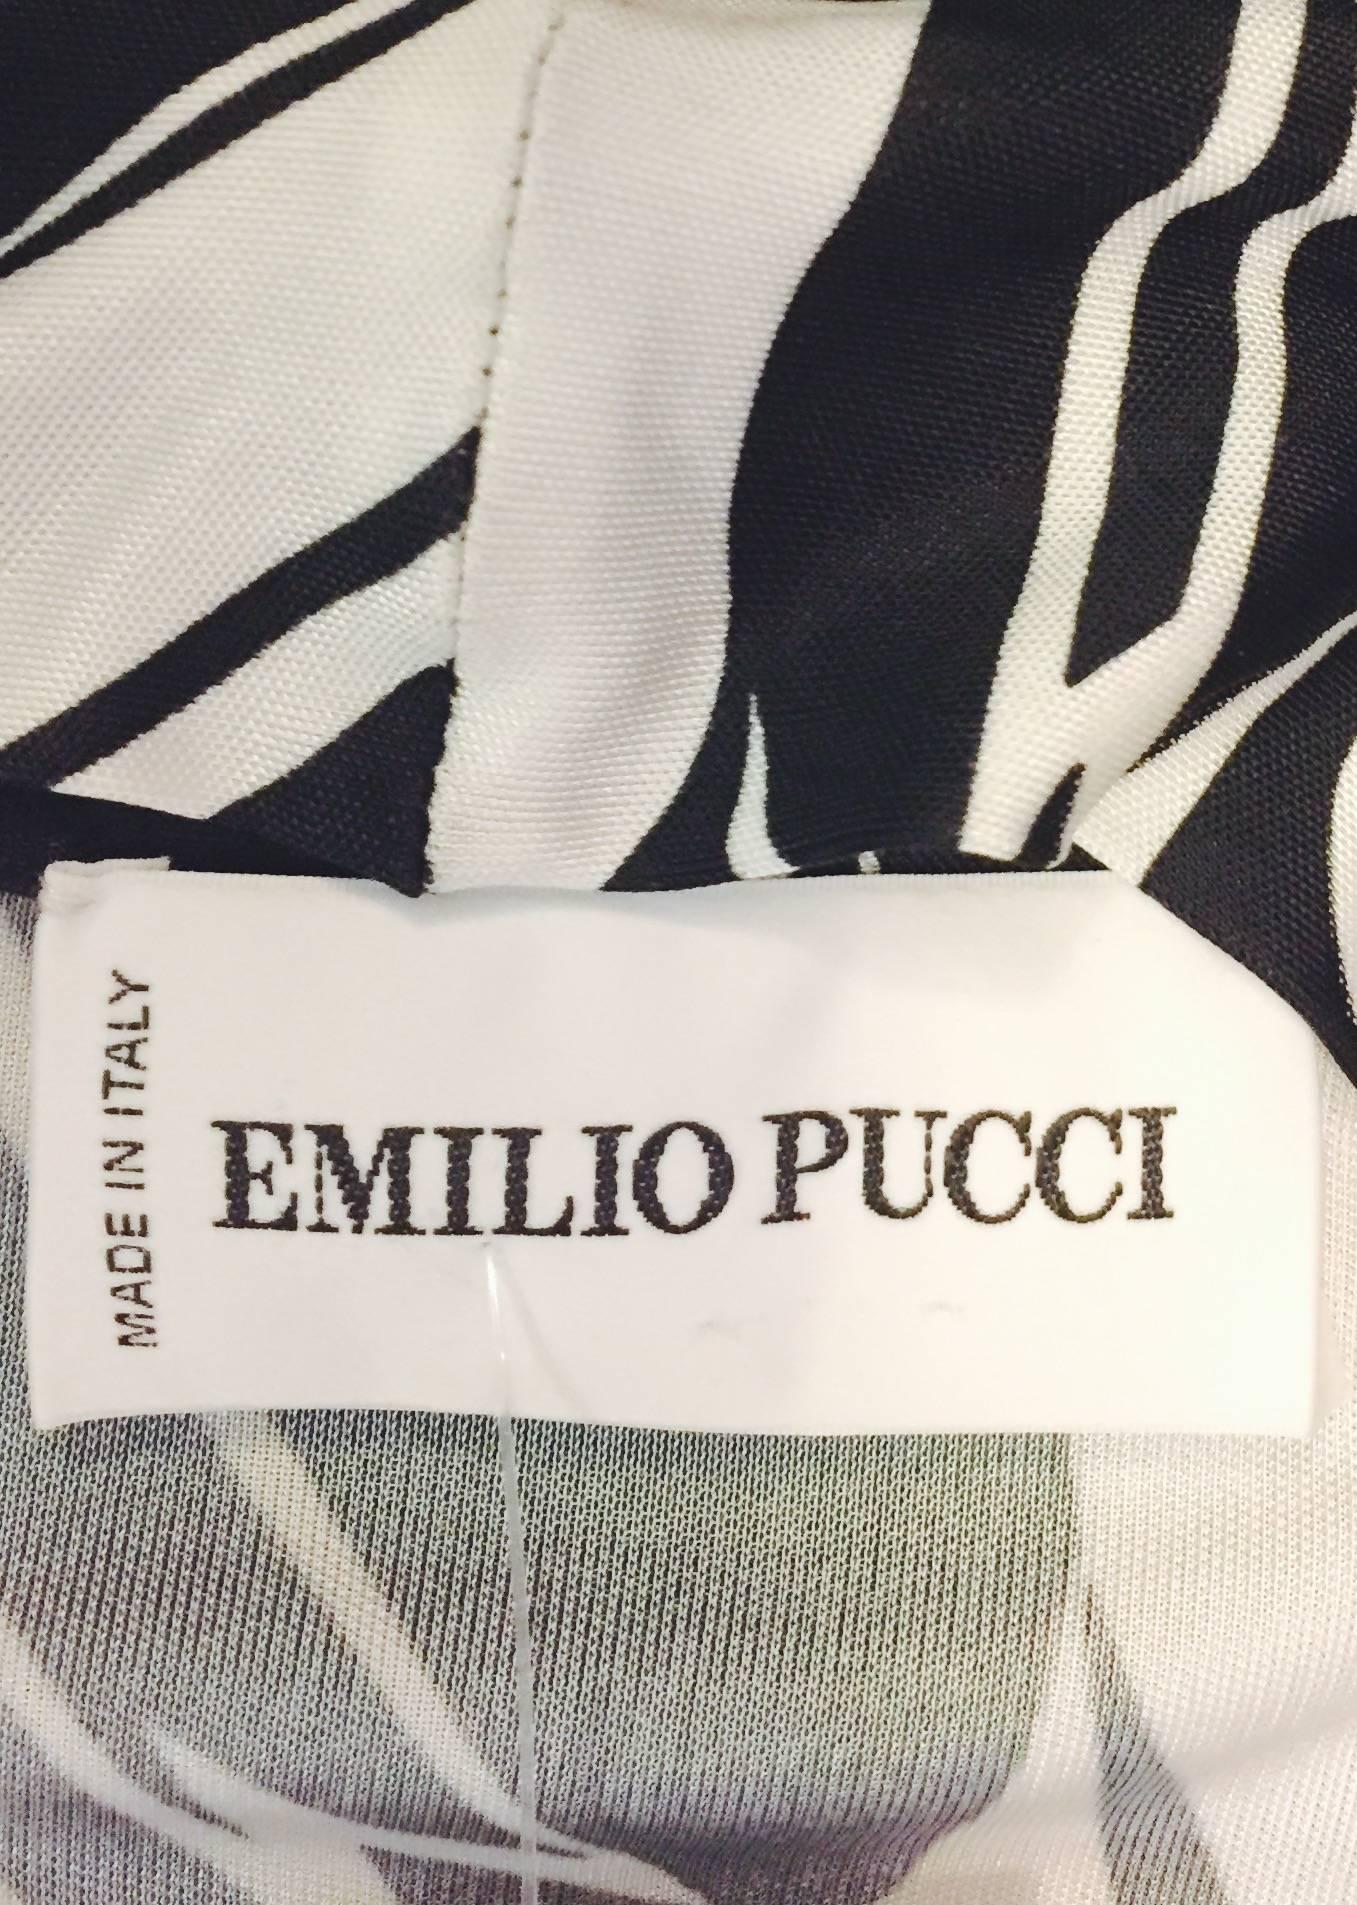 Elegant Emilio Pucci Black & White Long Sleeve Dress with Pencil Skirt For Sale 1